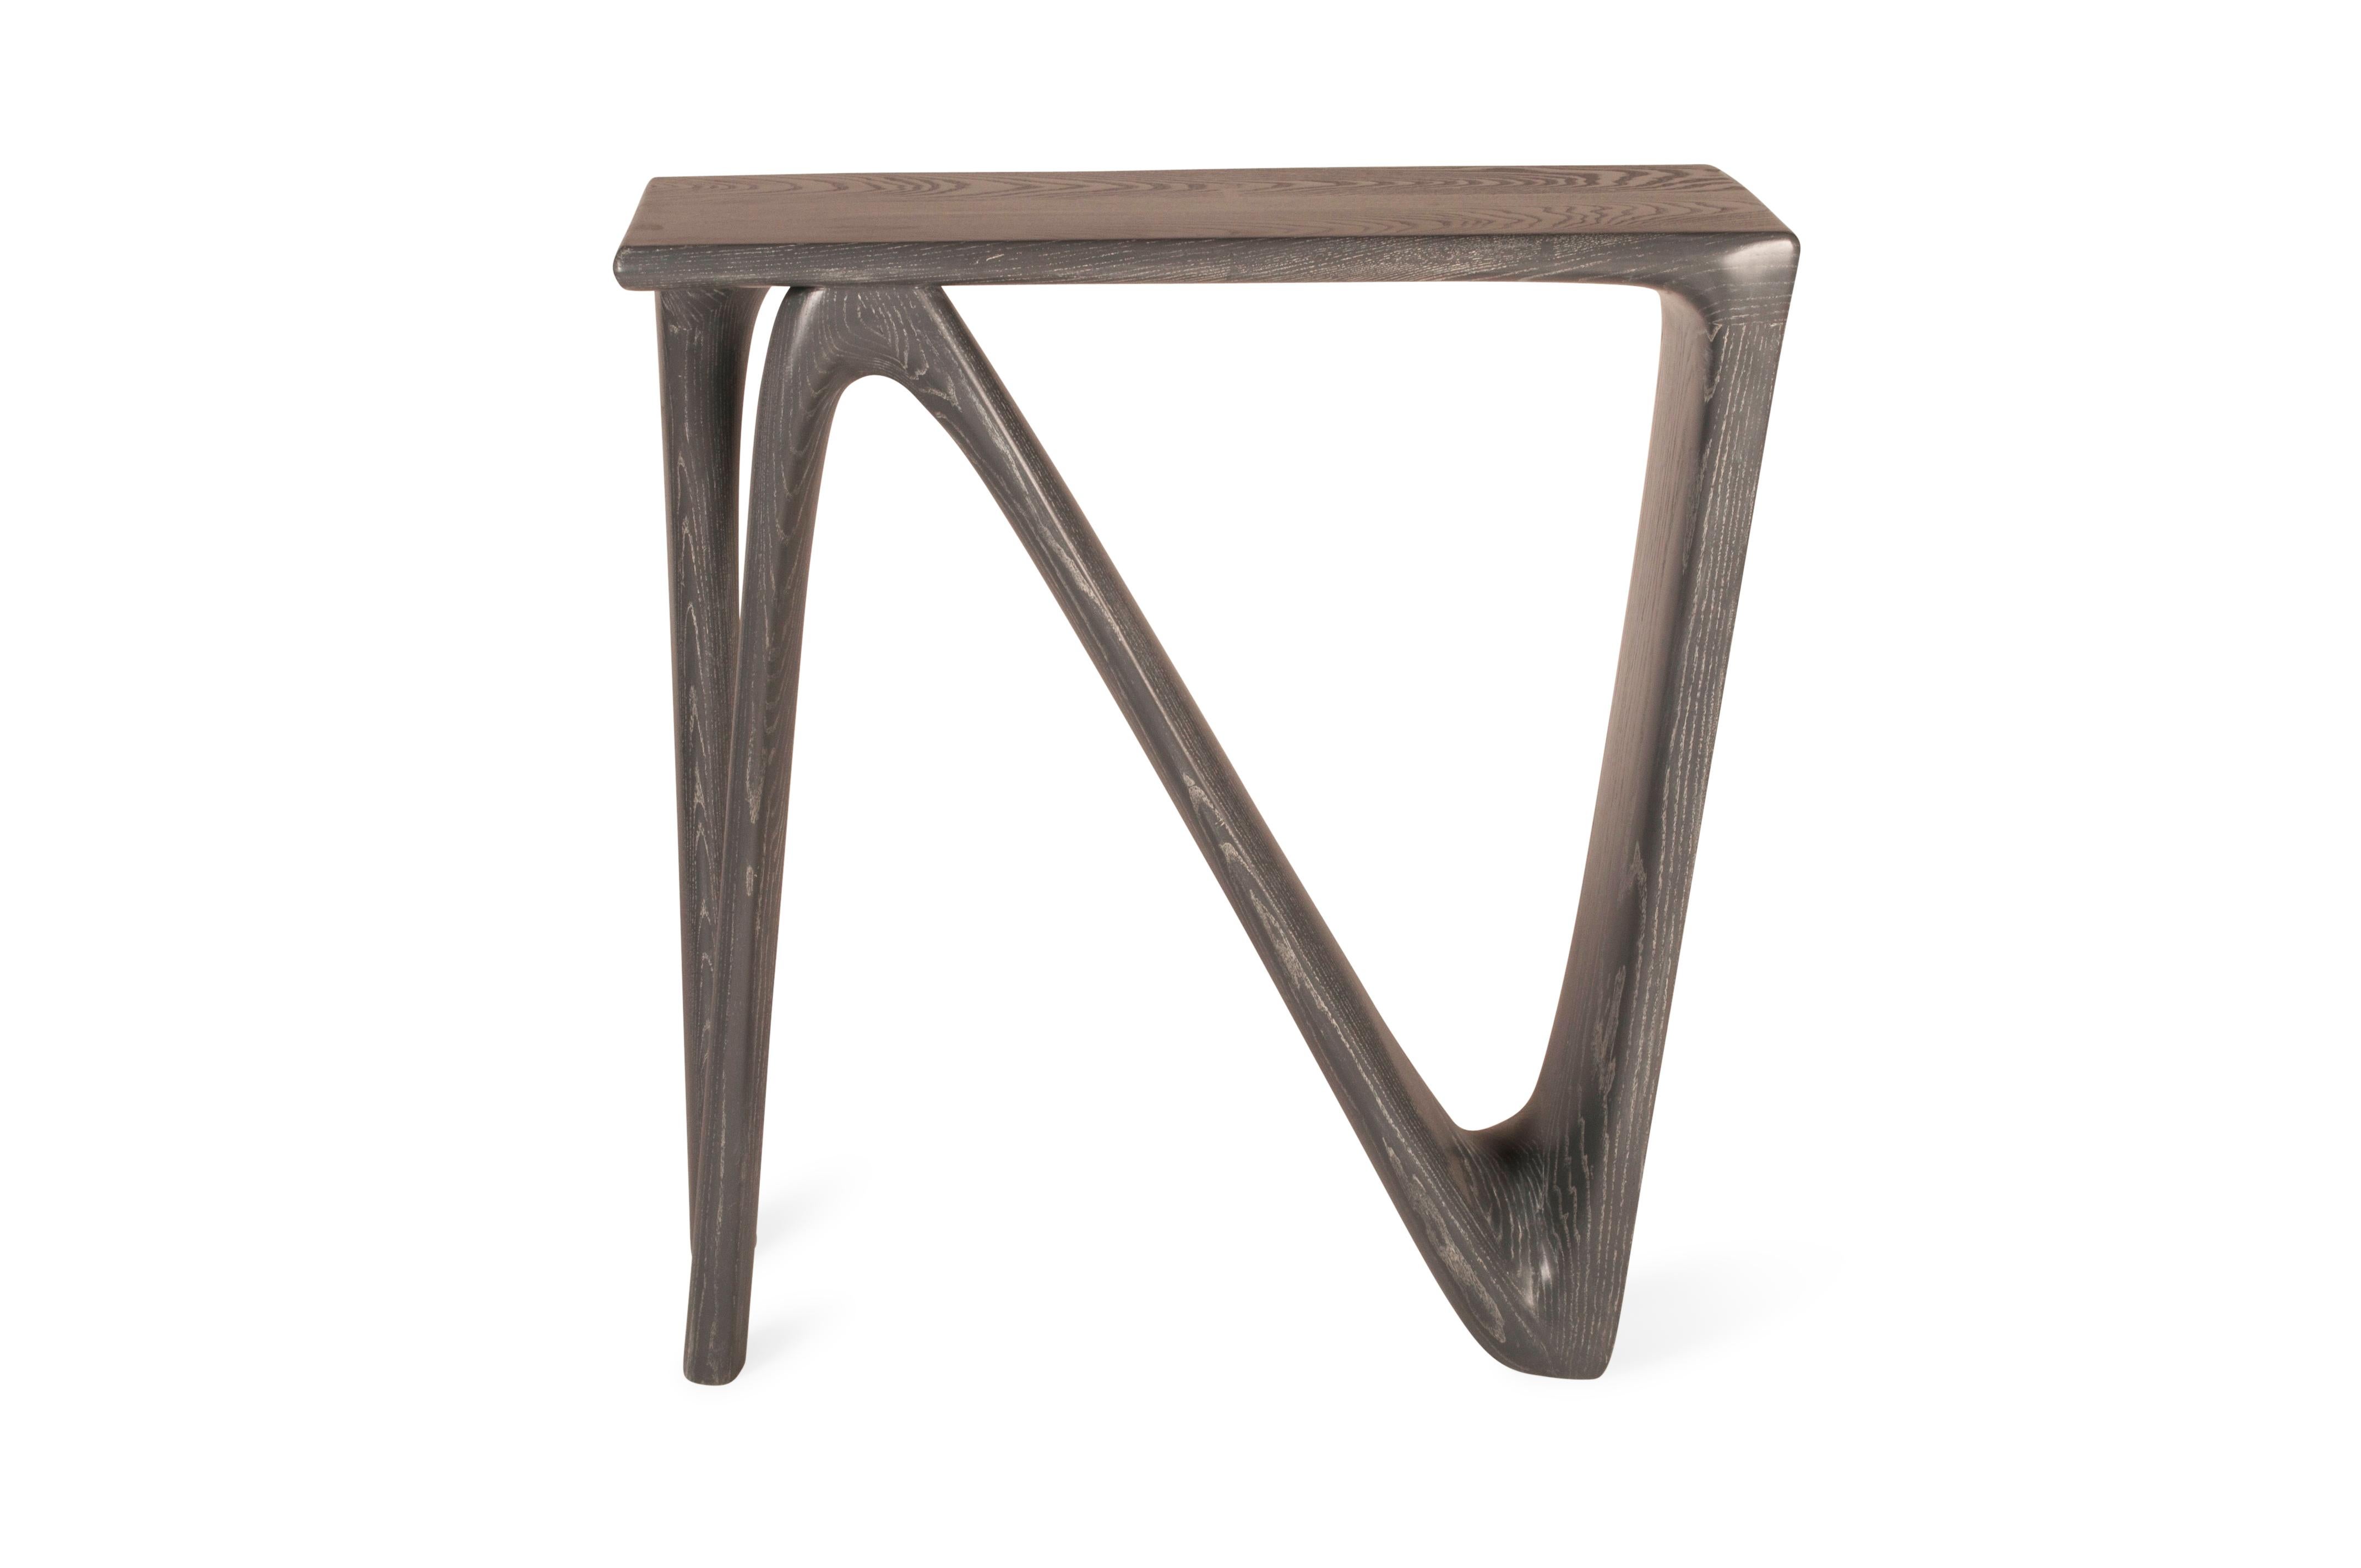 Amorph Astra console table solid ash wood with gray oak stain. Available in different finishes and custom sizes.
Our company, Amorph, is located in Los Angeles. It was born to make outstanding changes in the furniture design industry!

It is